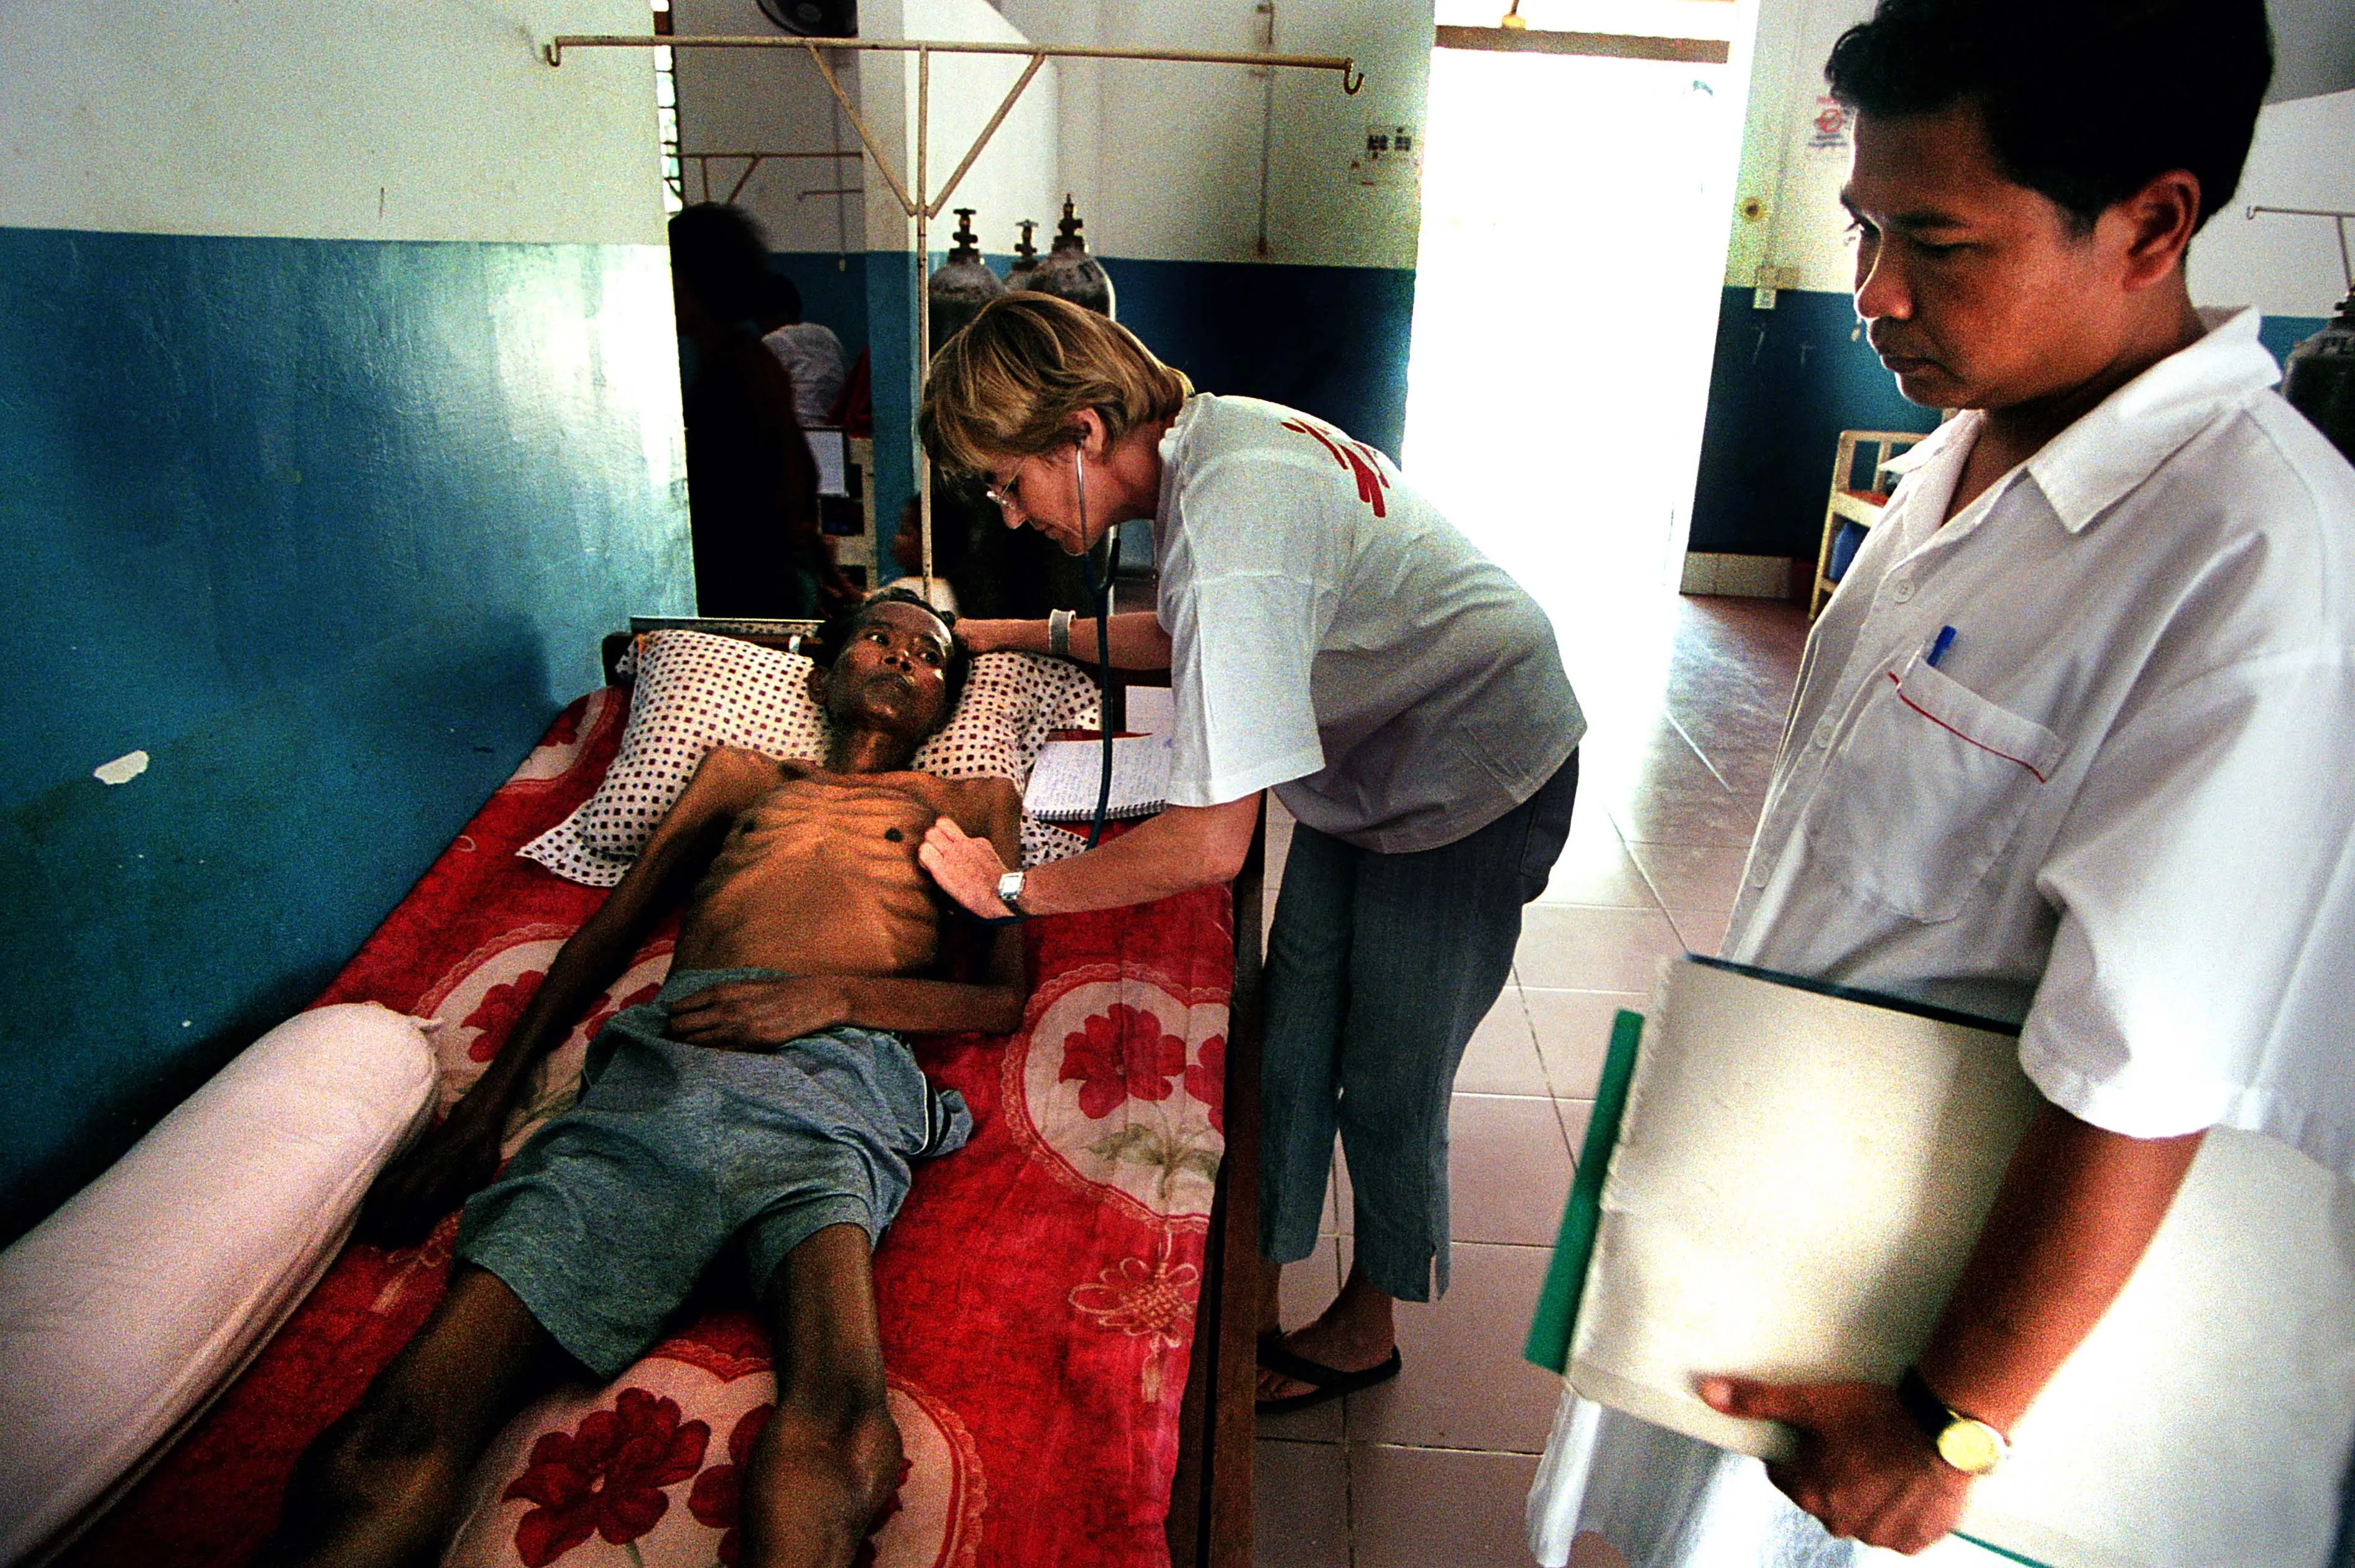 A number of 130,000 HIV-positive people is estimated in Cambodia from which 25,000 need antiretroviral (ARV) treatment. MSF is treating some 5,400 people which accounts for more than 50% of total people receiving treatment in the country, 2008.